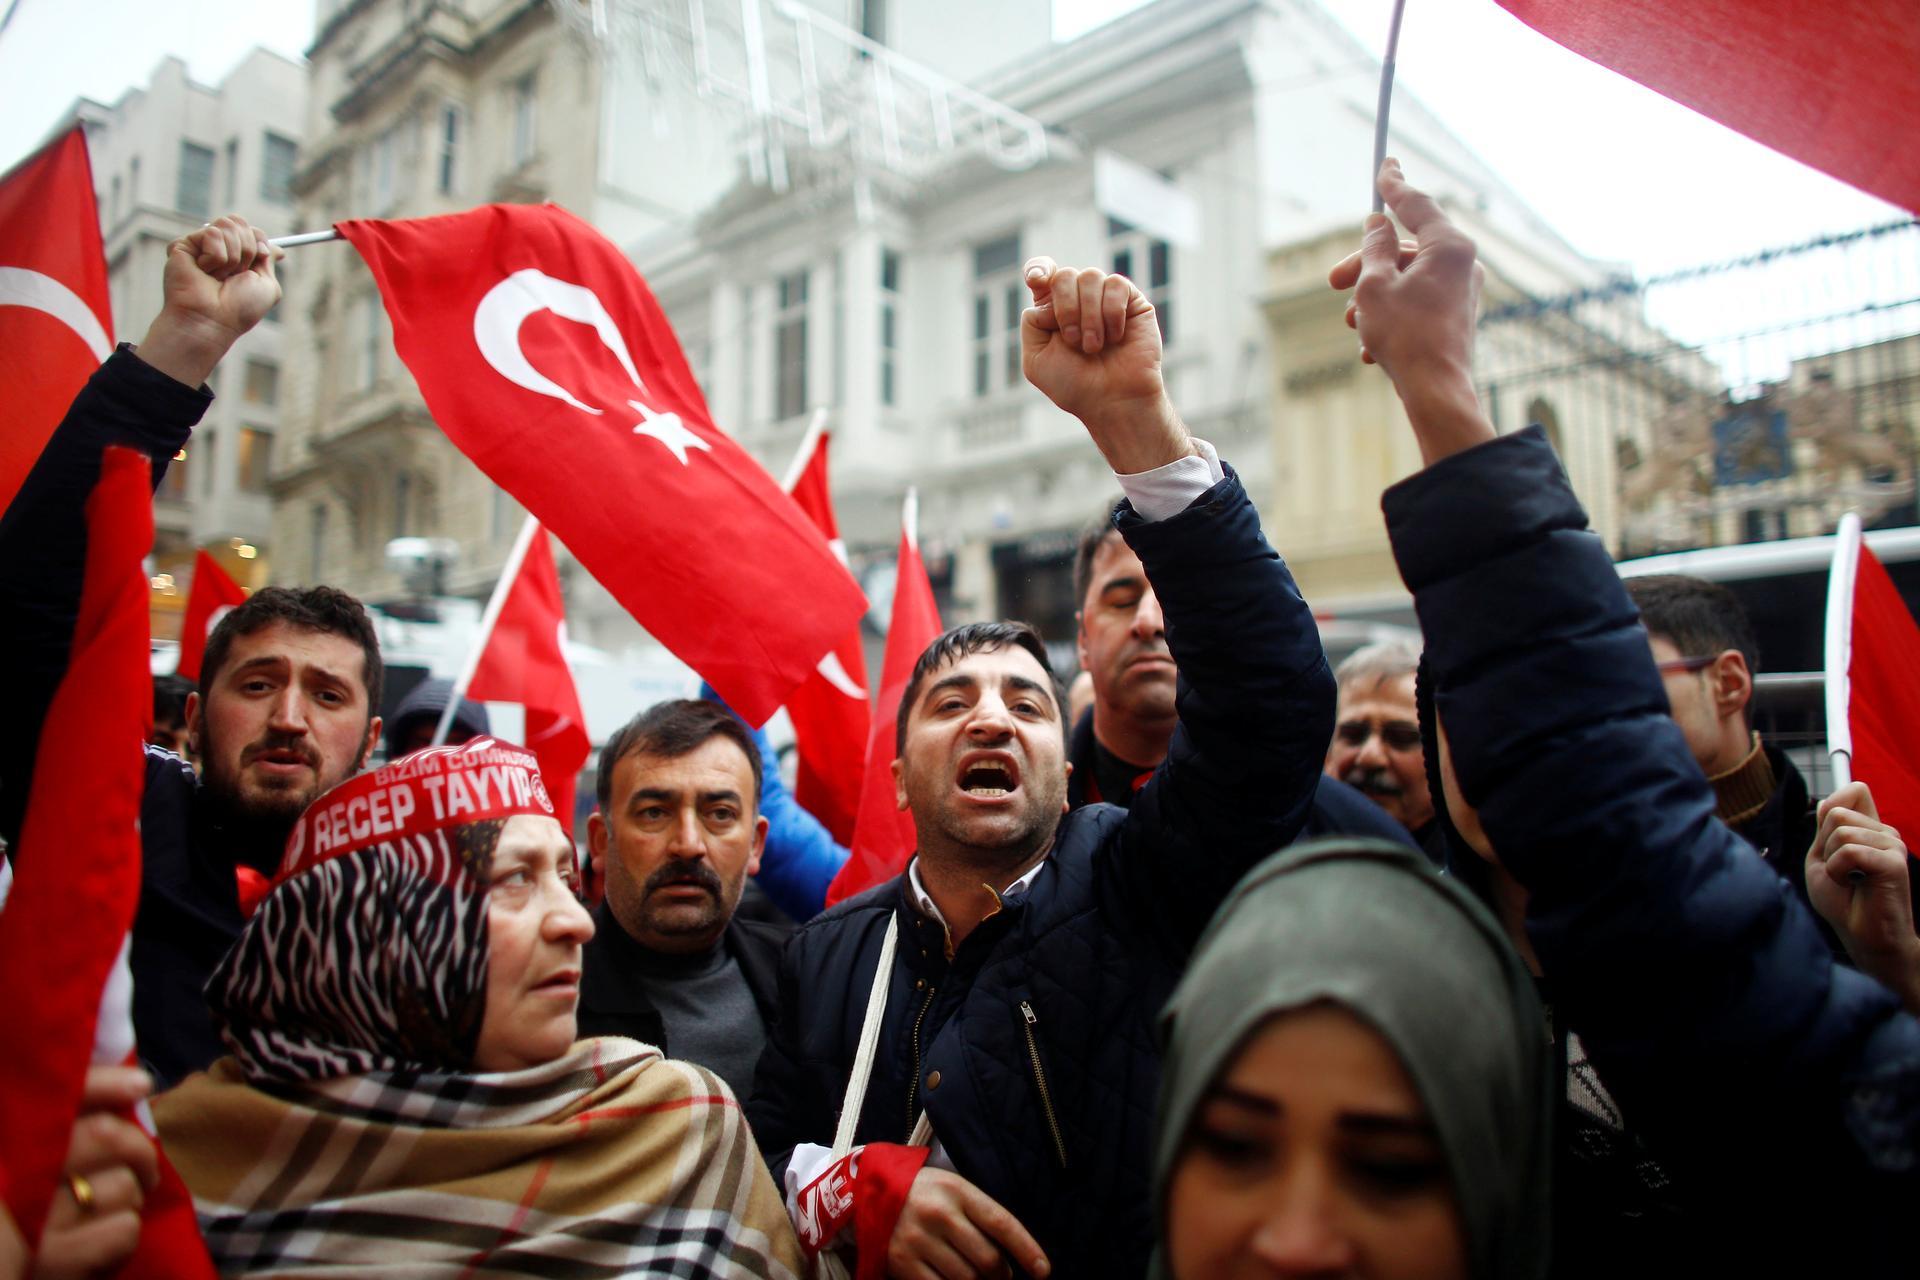 People shout slogans during a protest in front of the Dutch Consulate in Istanbul, Turkey, March 12, 2017.